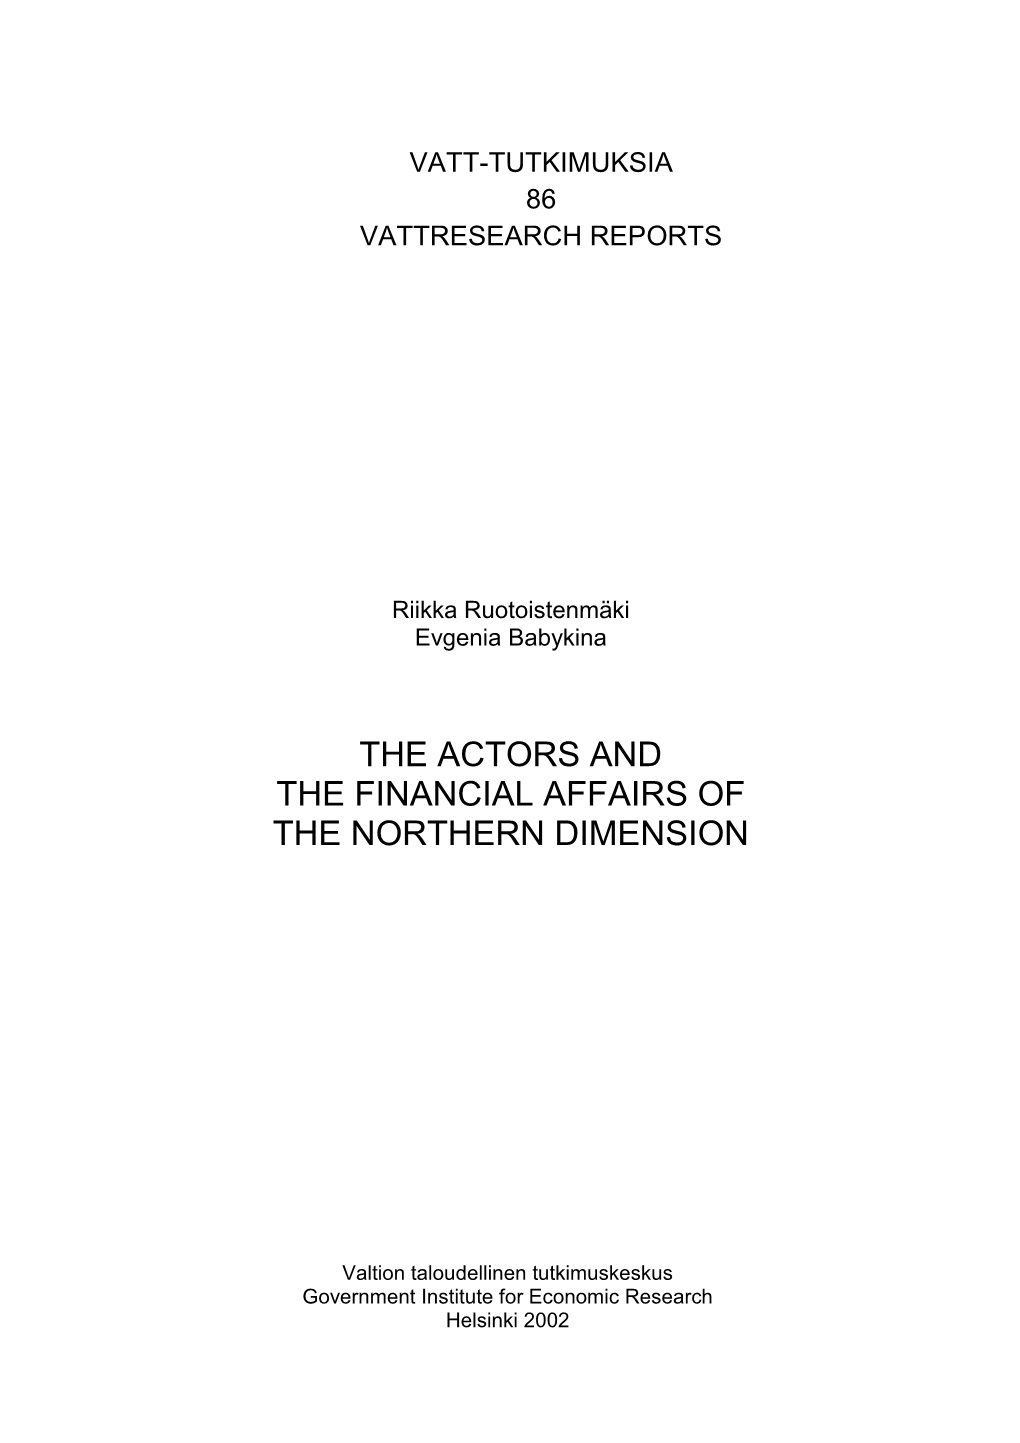 The Actors and the Financial Affairs of the Northern Dimension